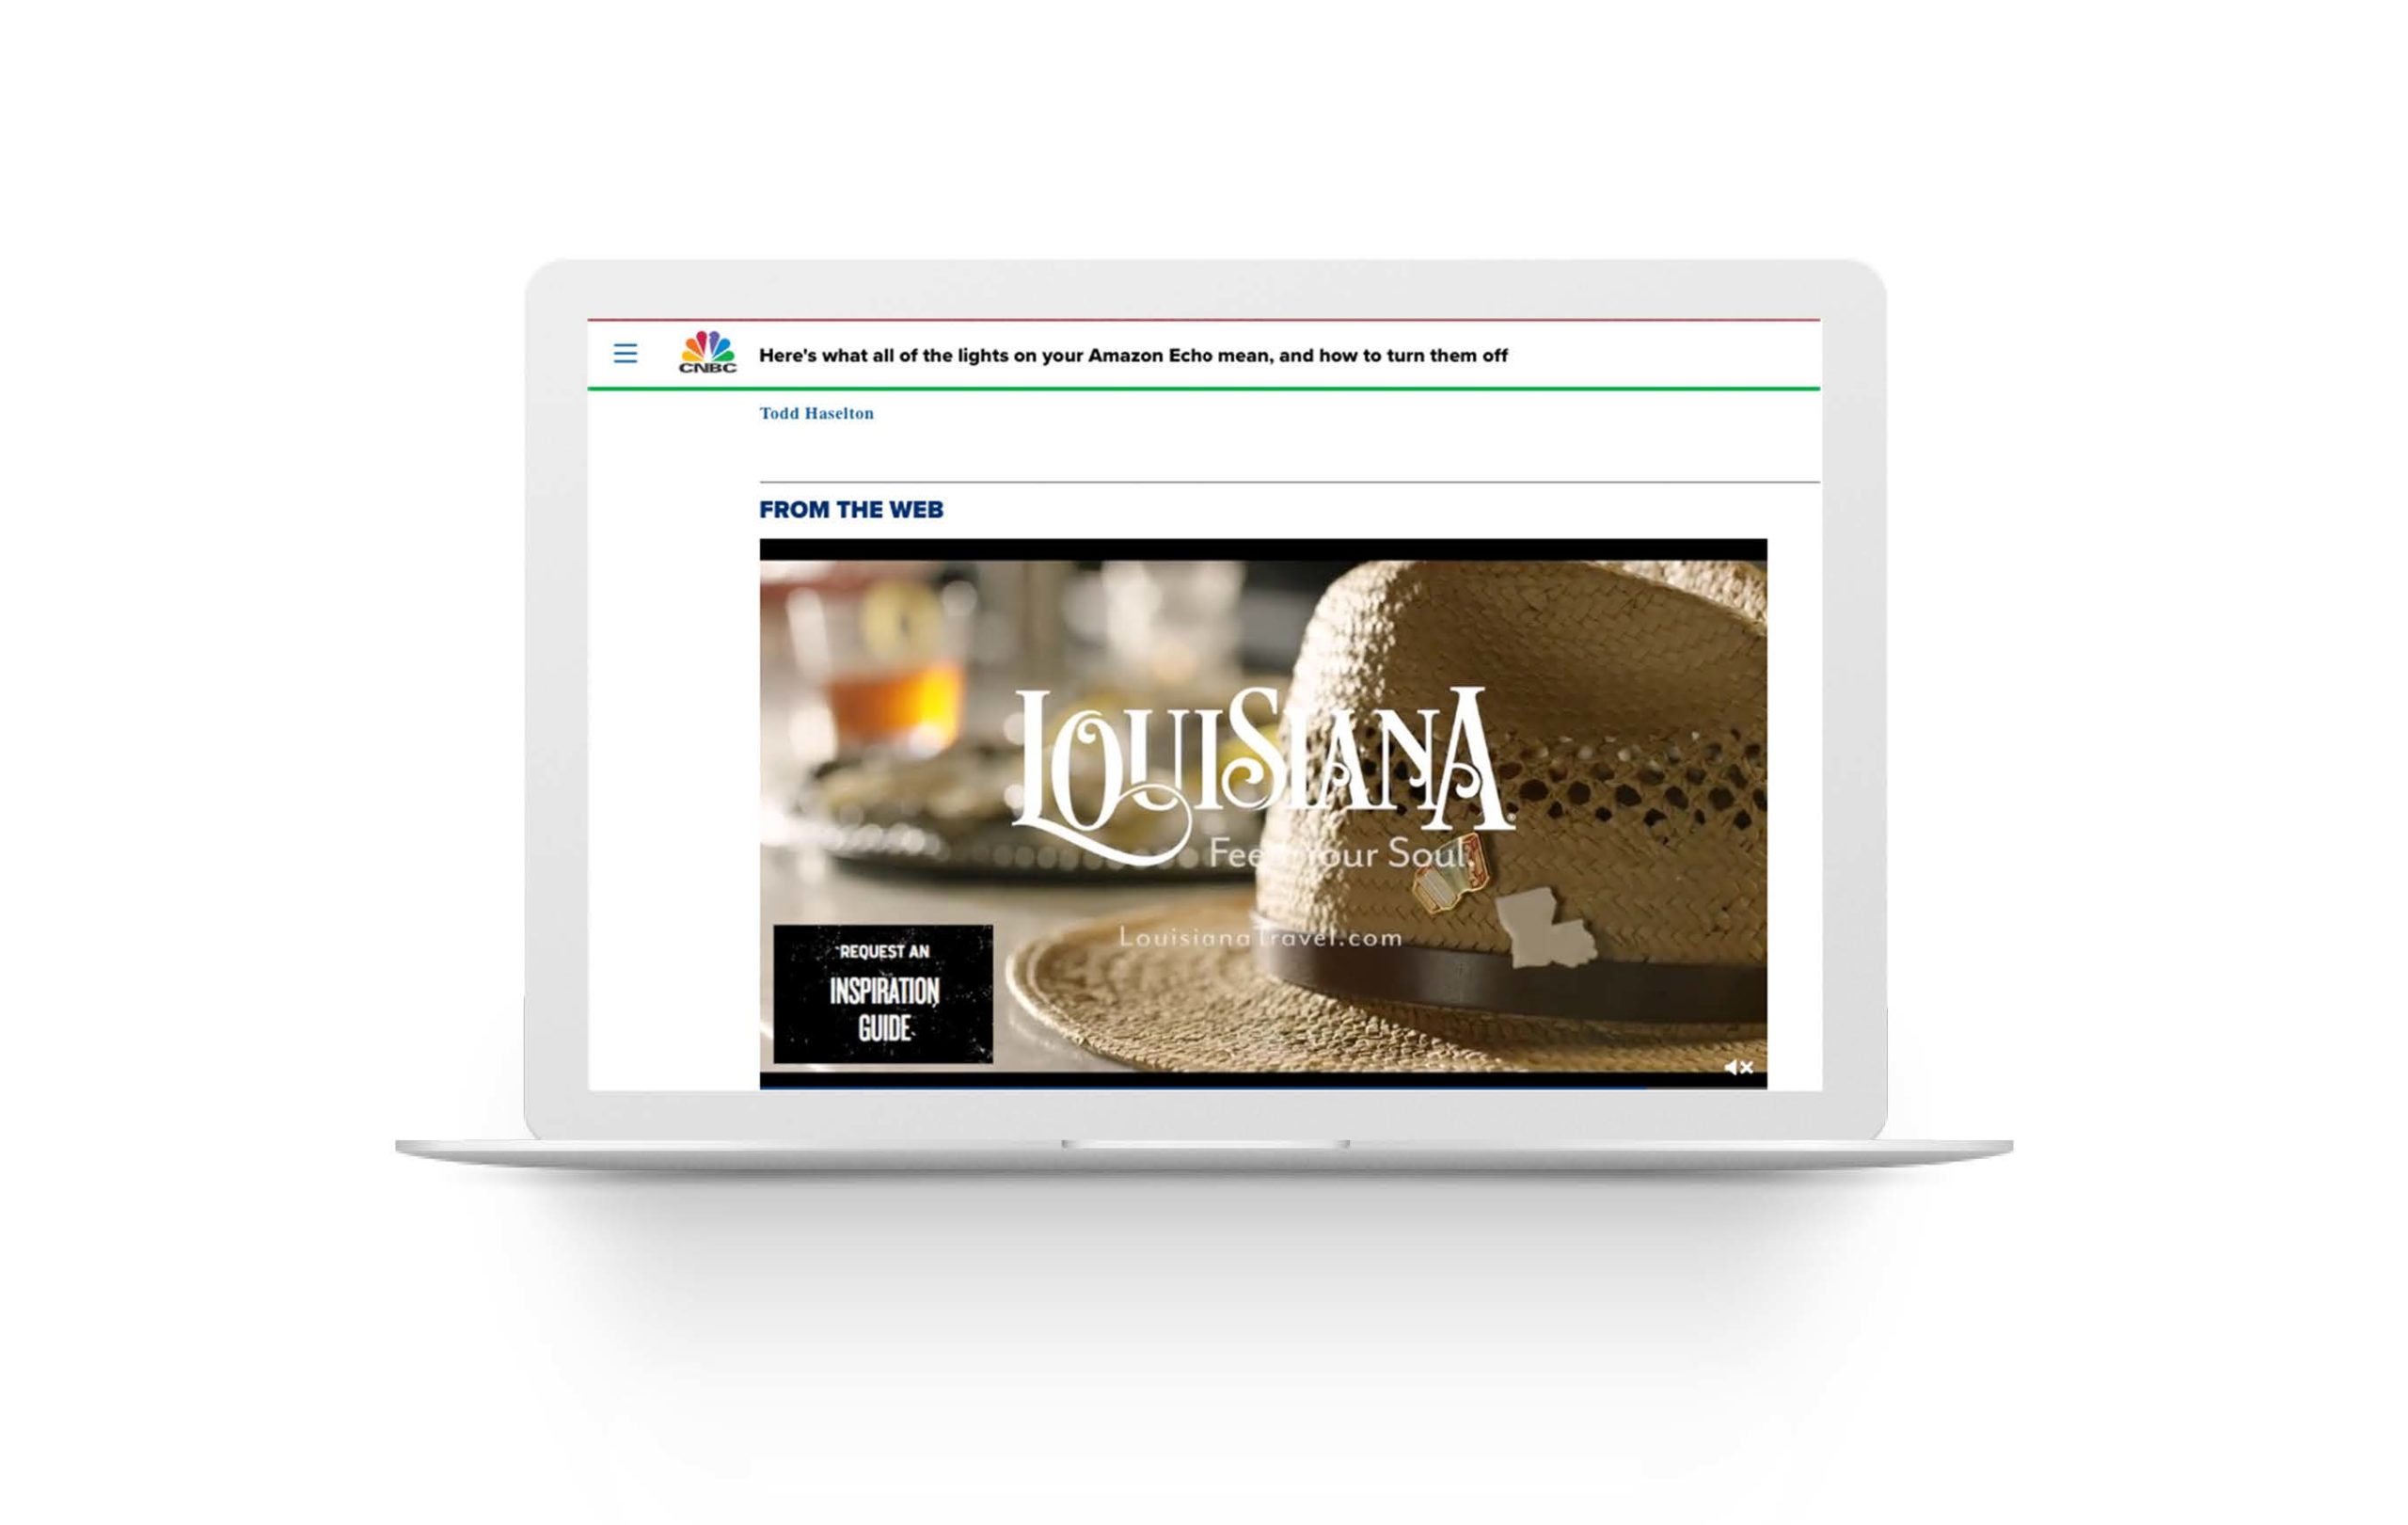 Morgan & Co. used a variety of media channels for their Tourism client’s video campaign, including channels like OTT, display, pre-roll and local television channels, alongside Taboola.